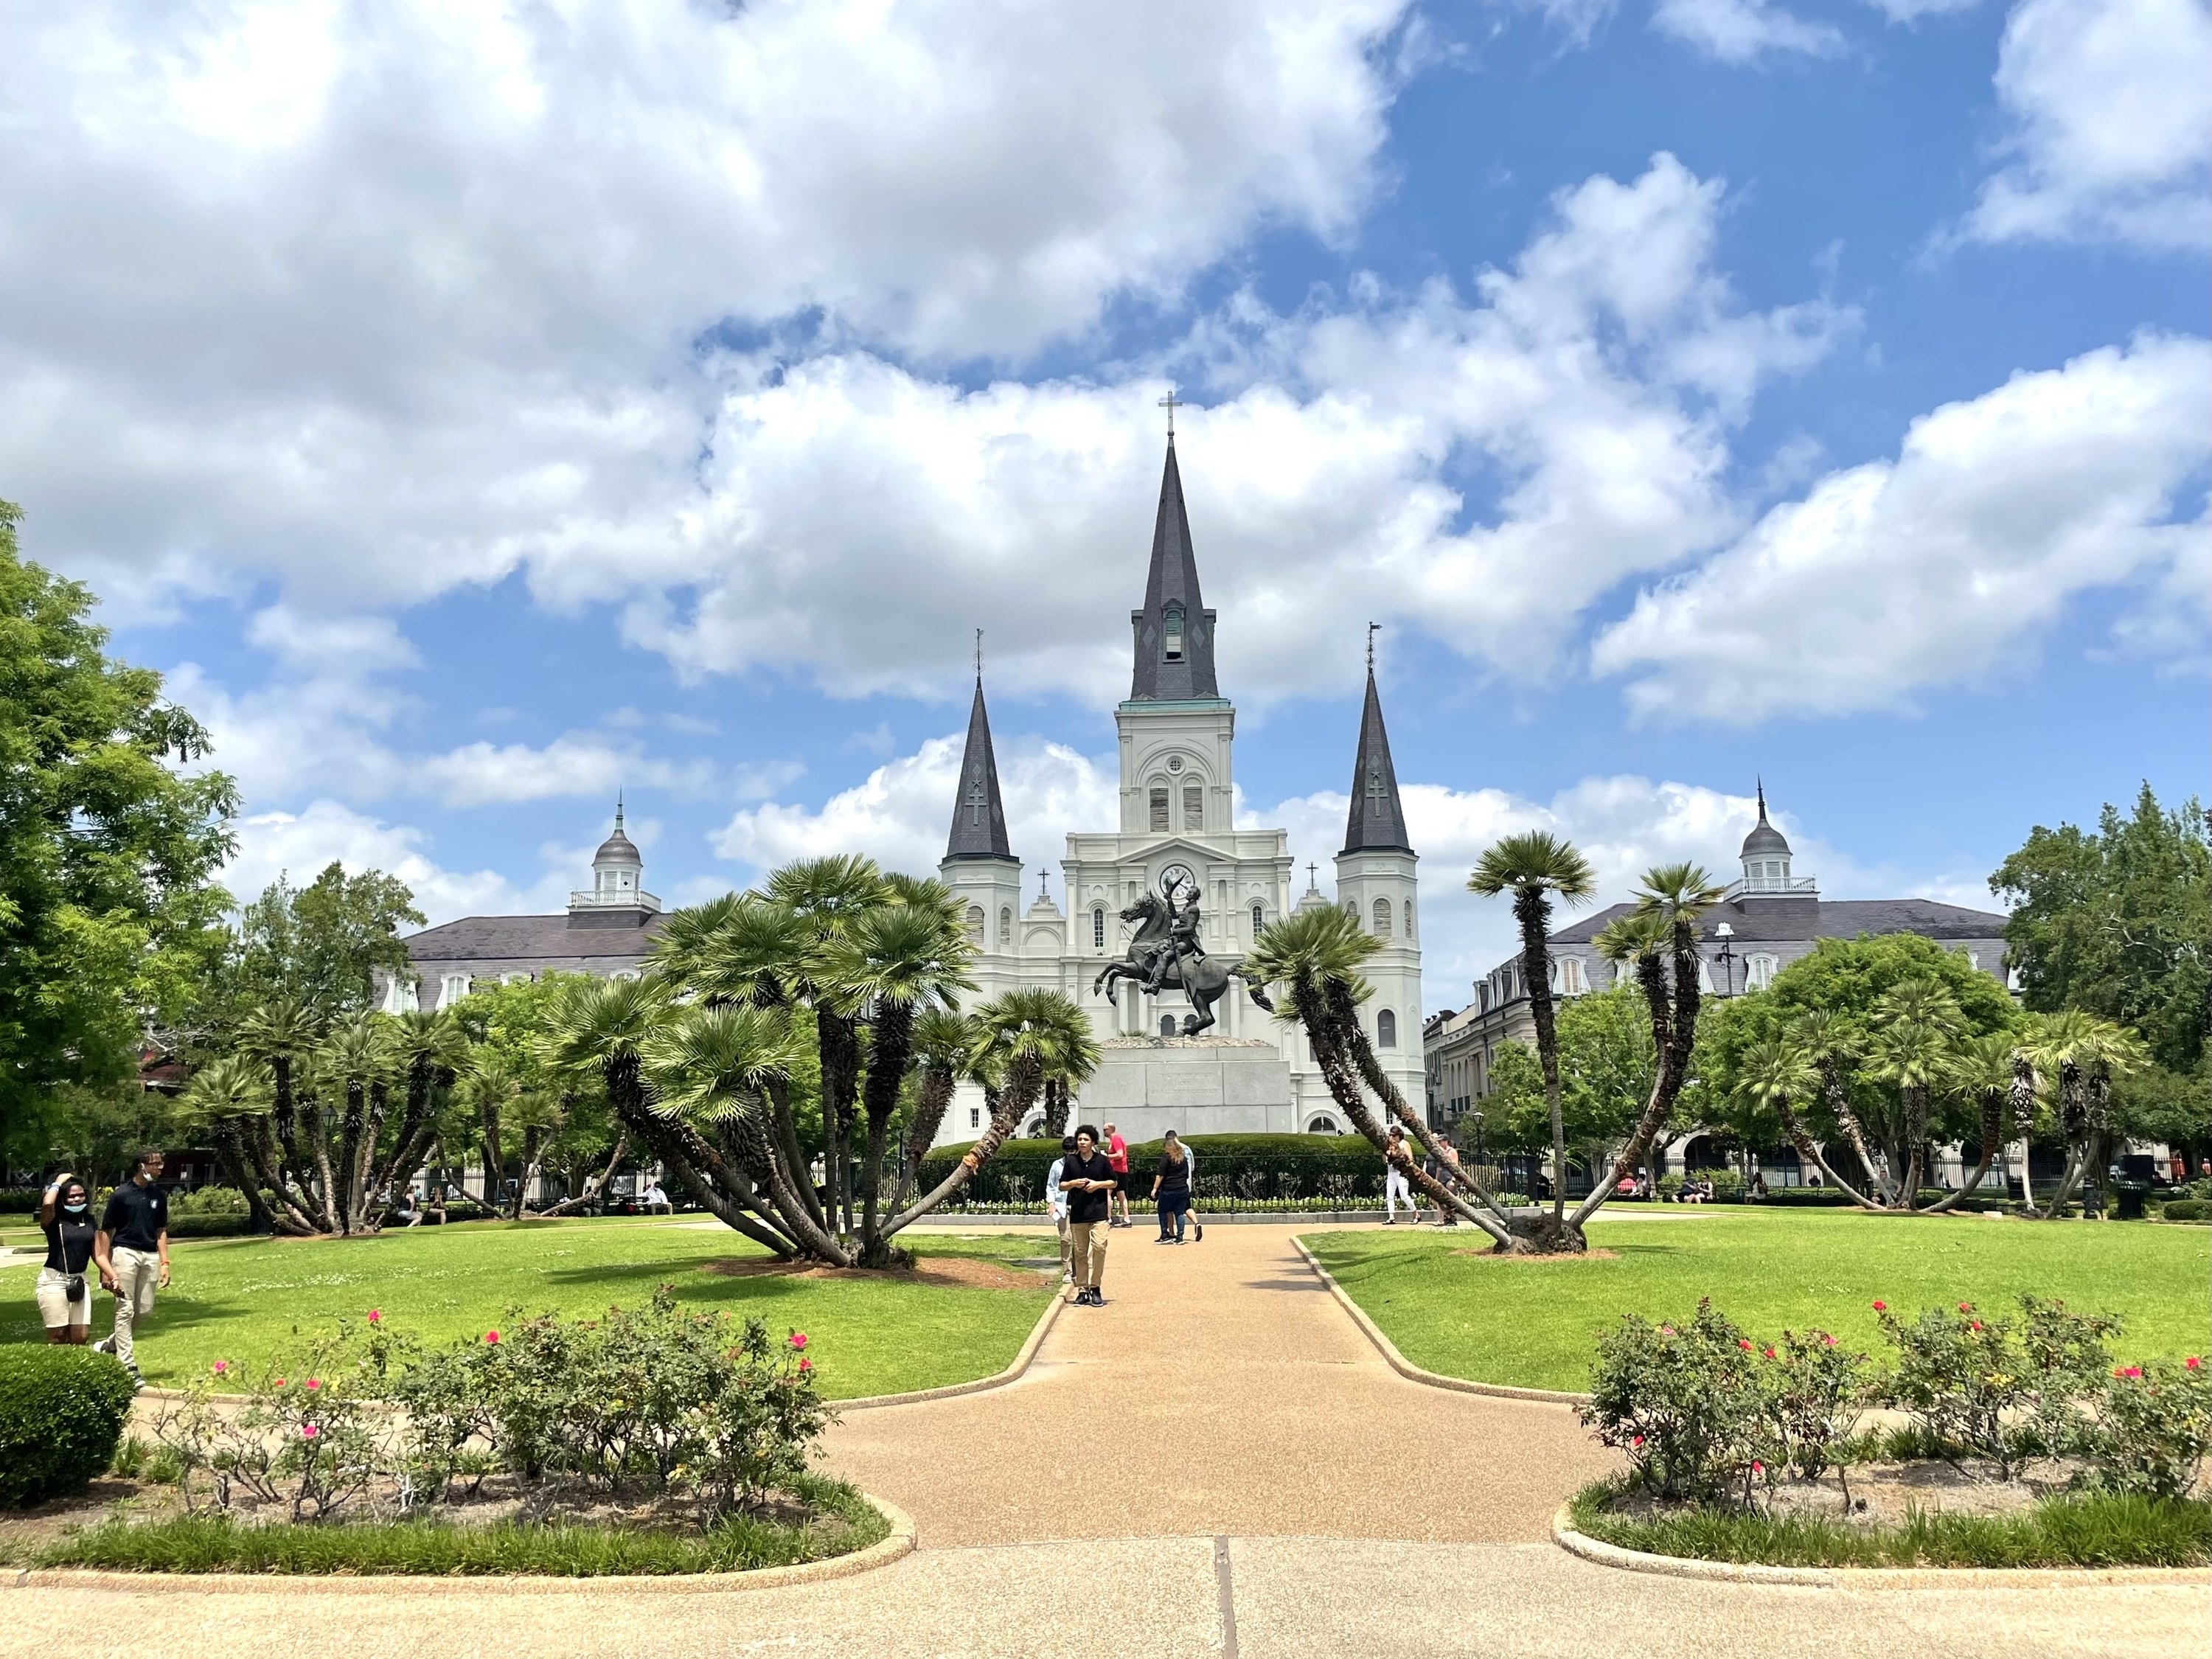 Jackson Square with the park in the foreground and church in the background